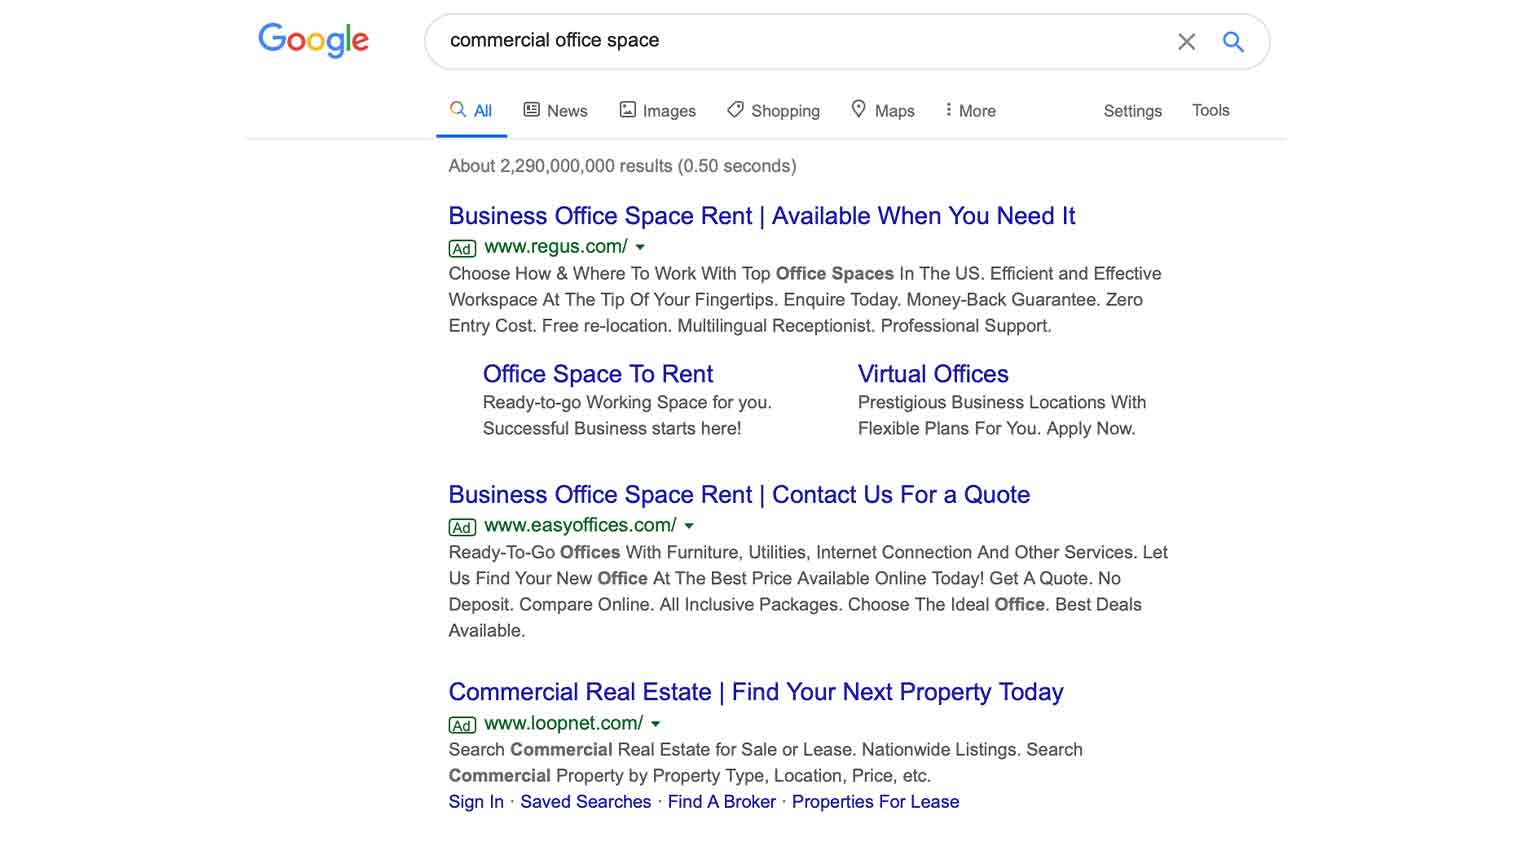 “Commercial office space” is a more specific search term.